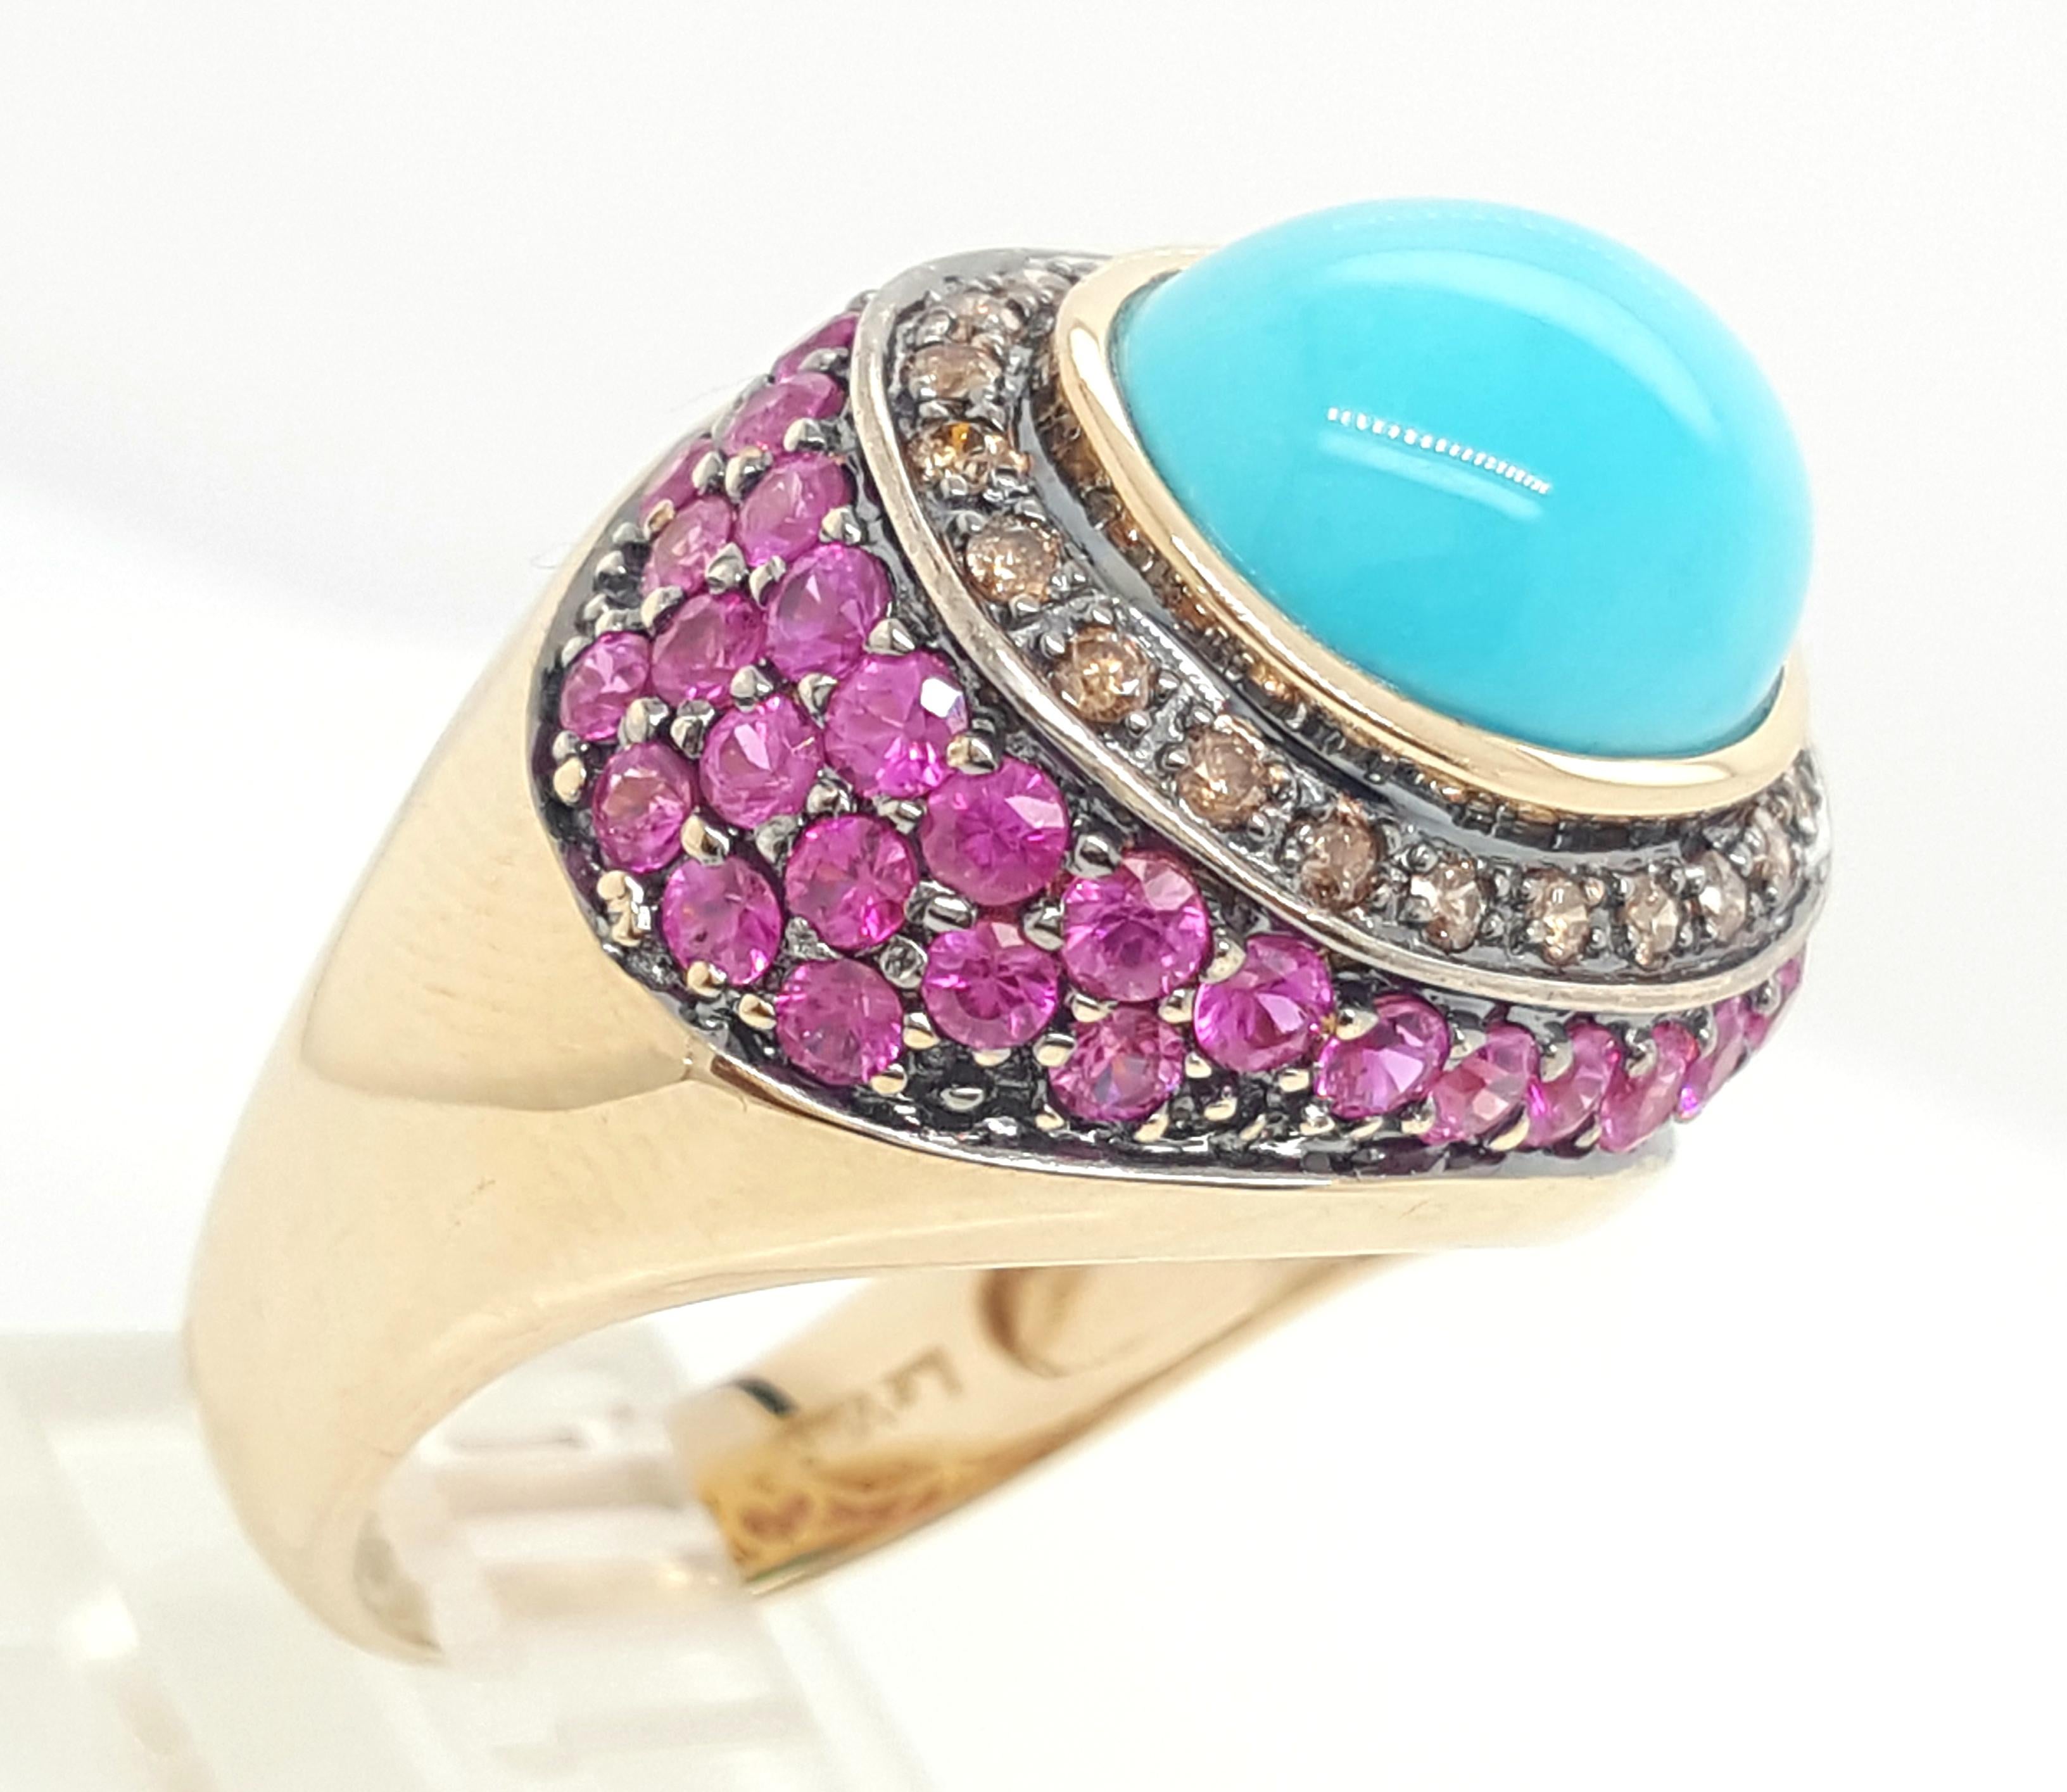 LeVian Robins Egg Blue Turquoise Diamond and Ruby 14 Karat Yellow Gold Ring 1